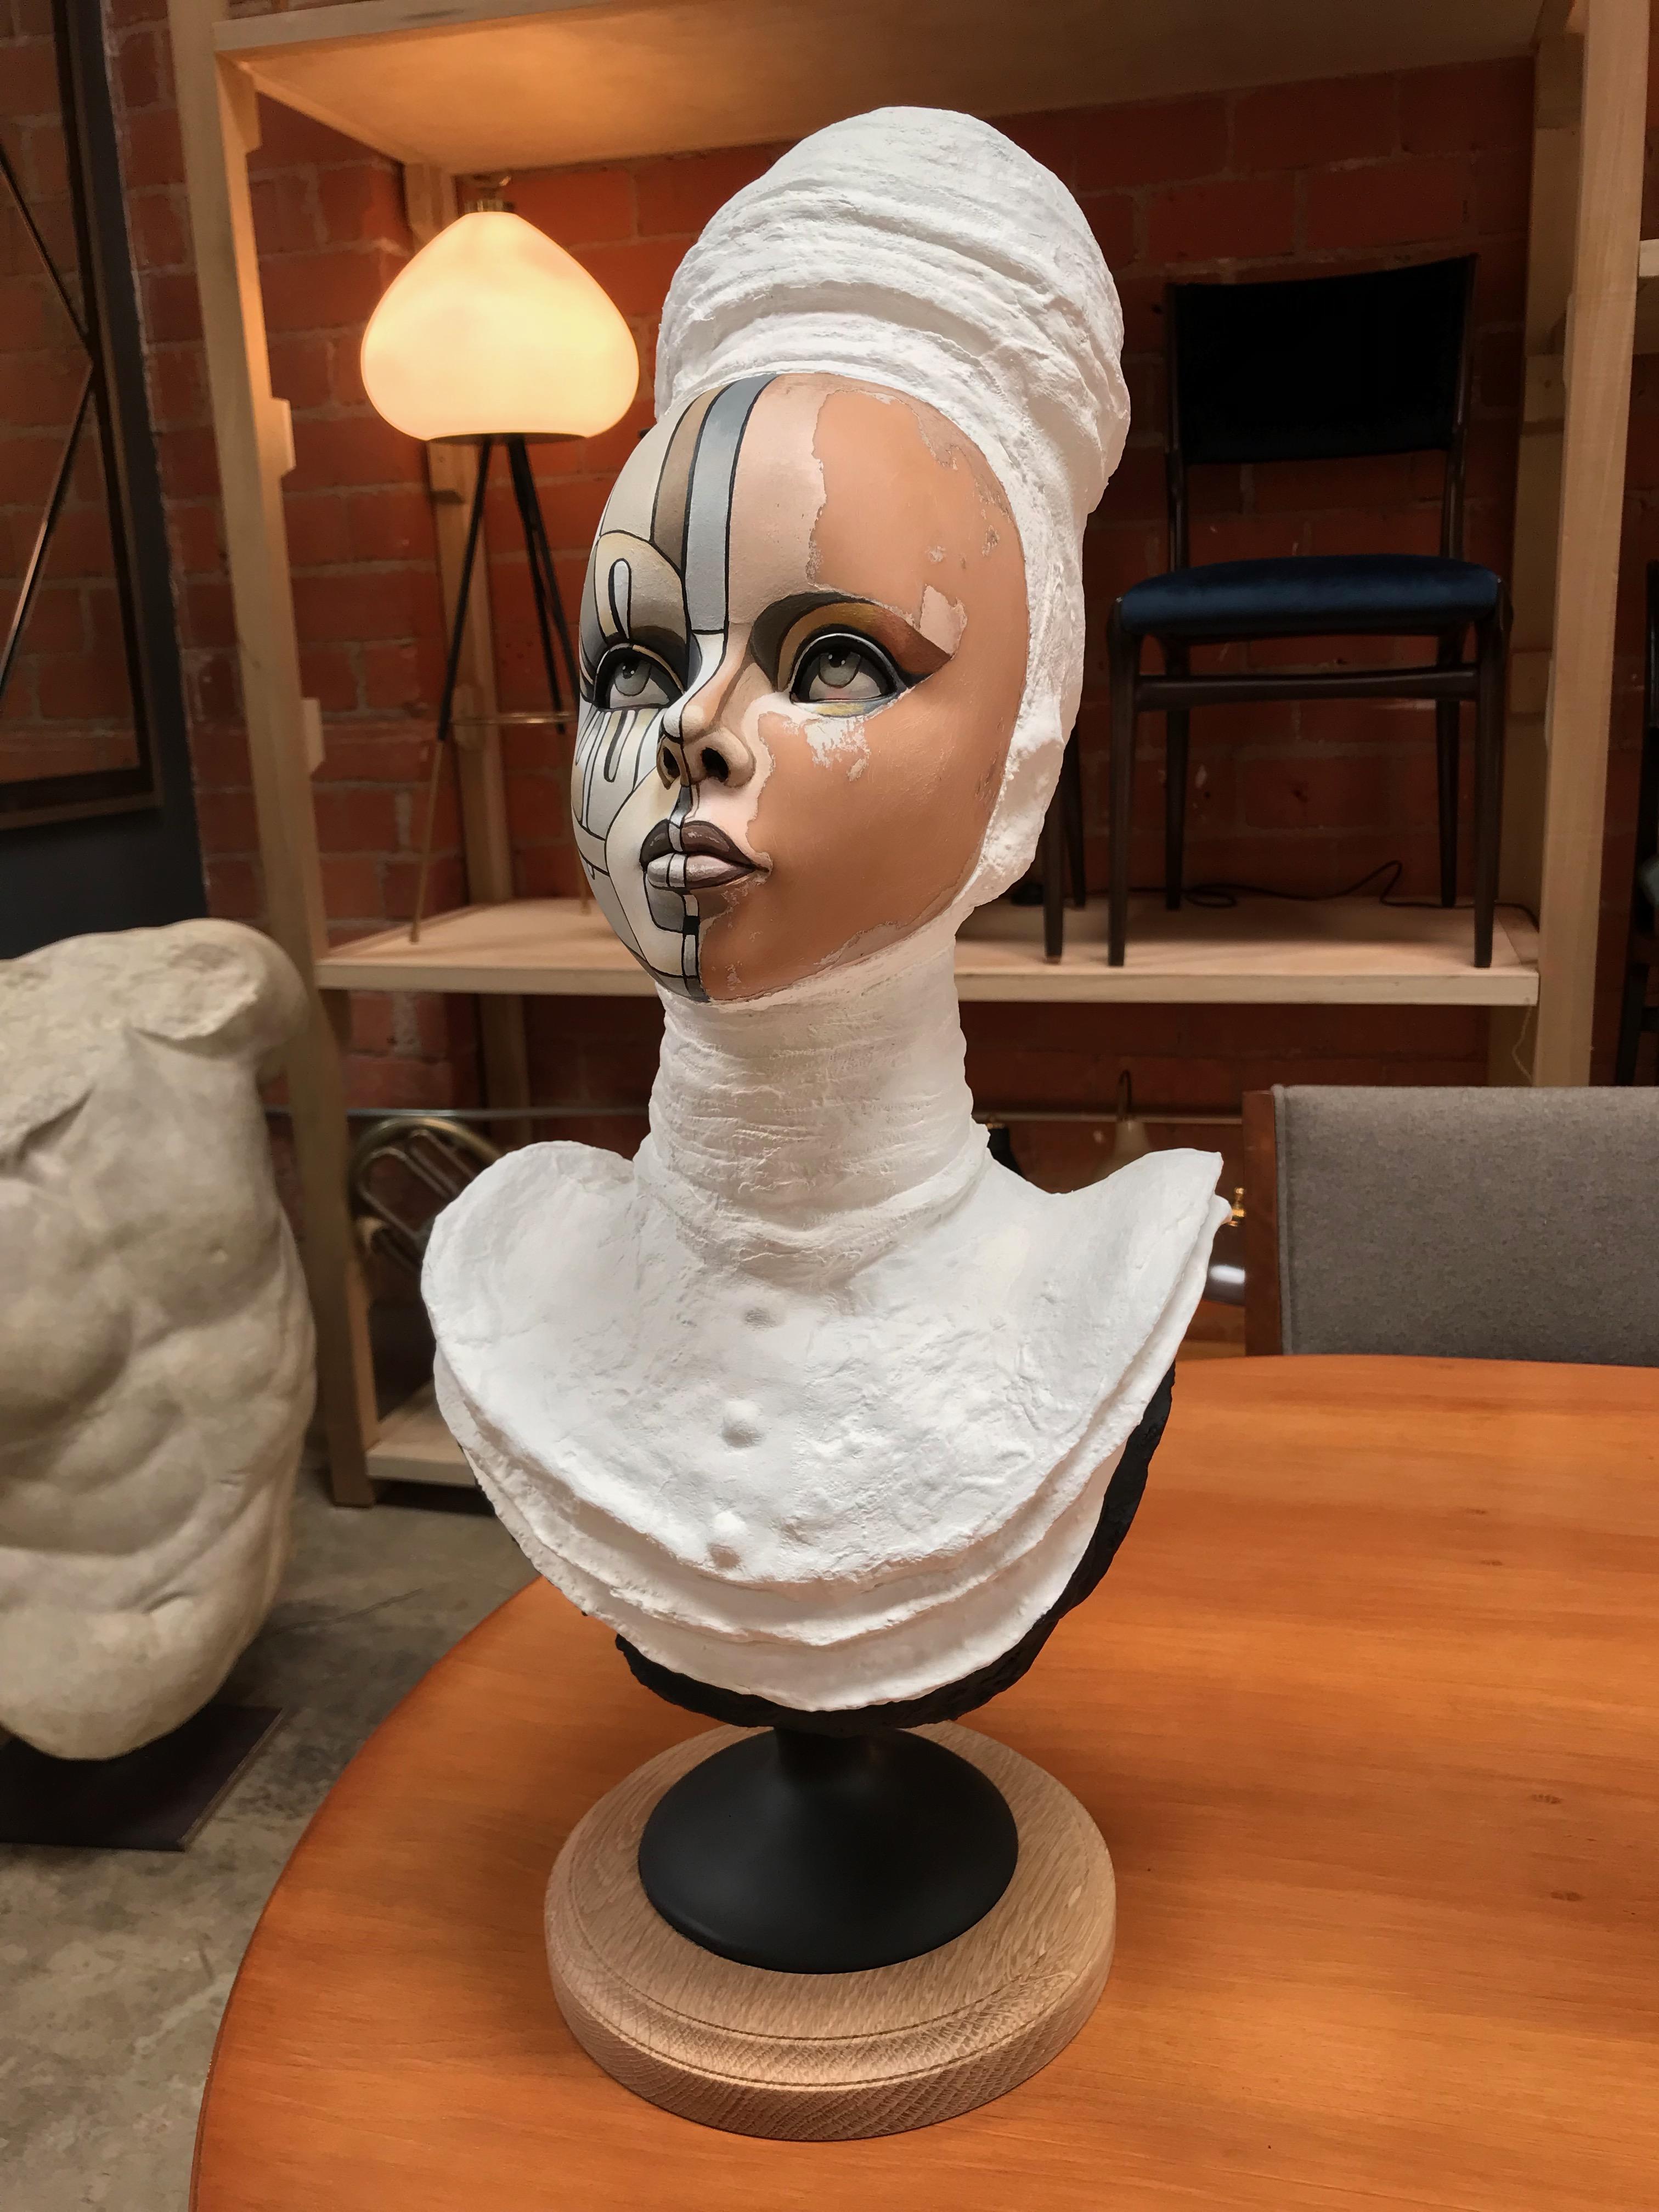 Bust of a young women, signed David Gilmore, USA, 2019.
Each bust started with a vintage mannequin head which was then placed on either a metal or glass stand. The artist, David Gilmore, painted a pattern over their faces in a similar manner to his